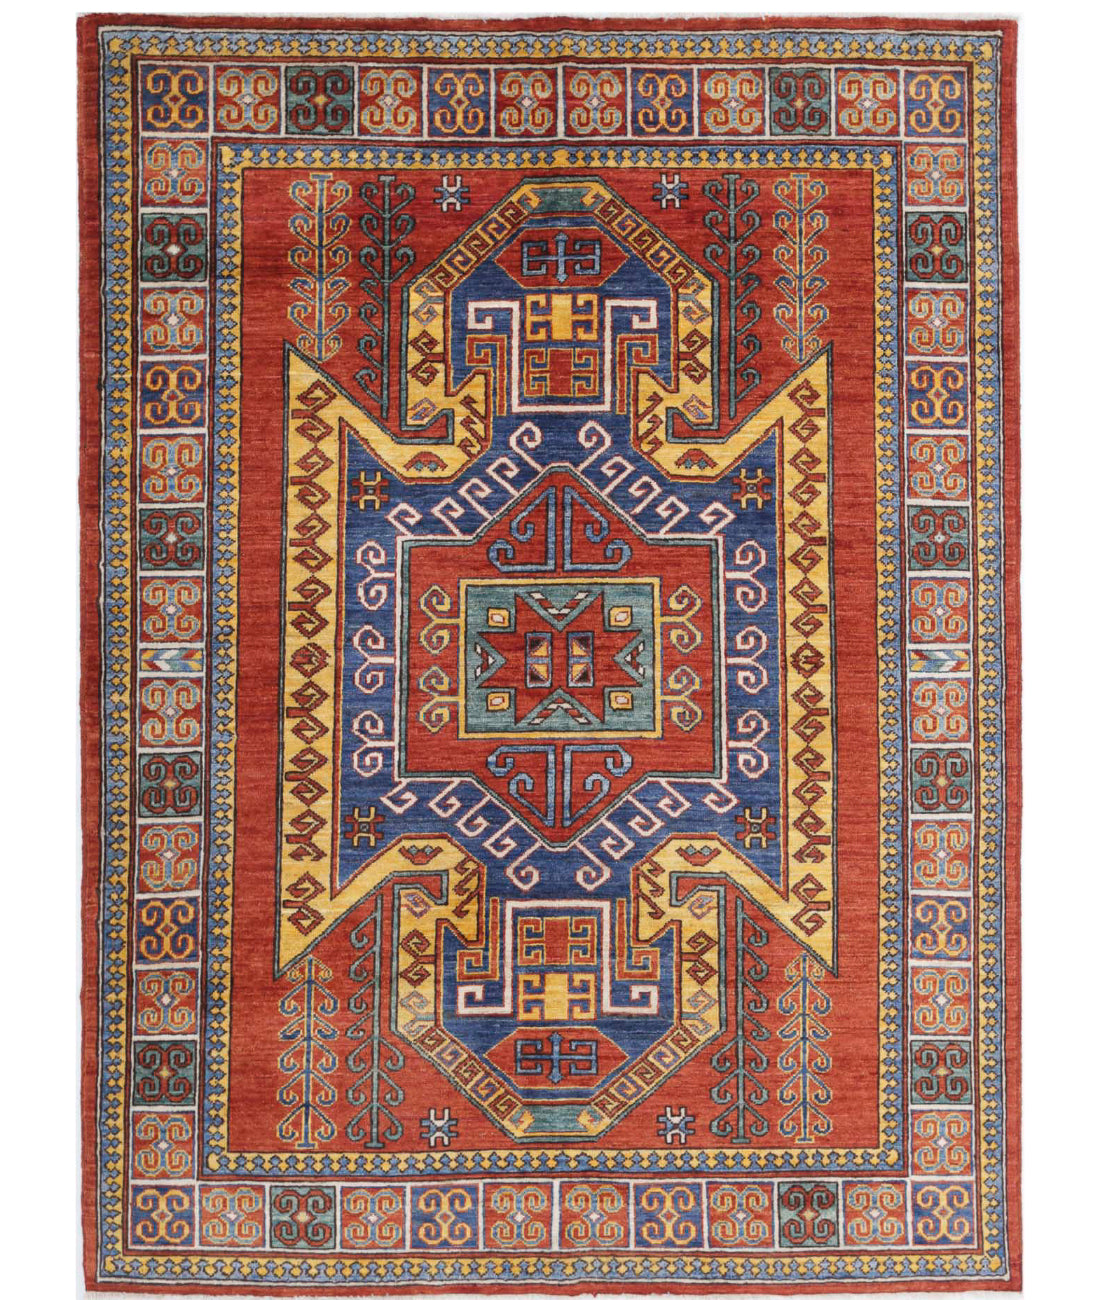 Hand Knotted Nomadic Caucasian Humna Wool Rug - 4&#39;10&#39;&#39; x 6&#39;7&#39;&#39; 4&#39;10&#39;&#39; x 6&#39;7&#39;&#39; (145 X 198) / Red / Multi